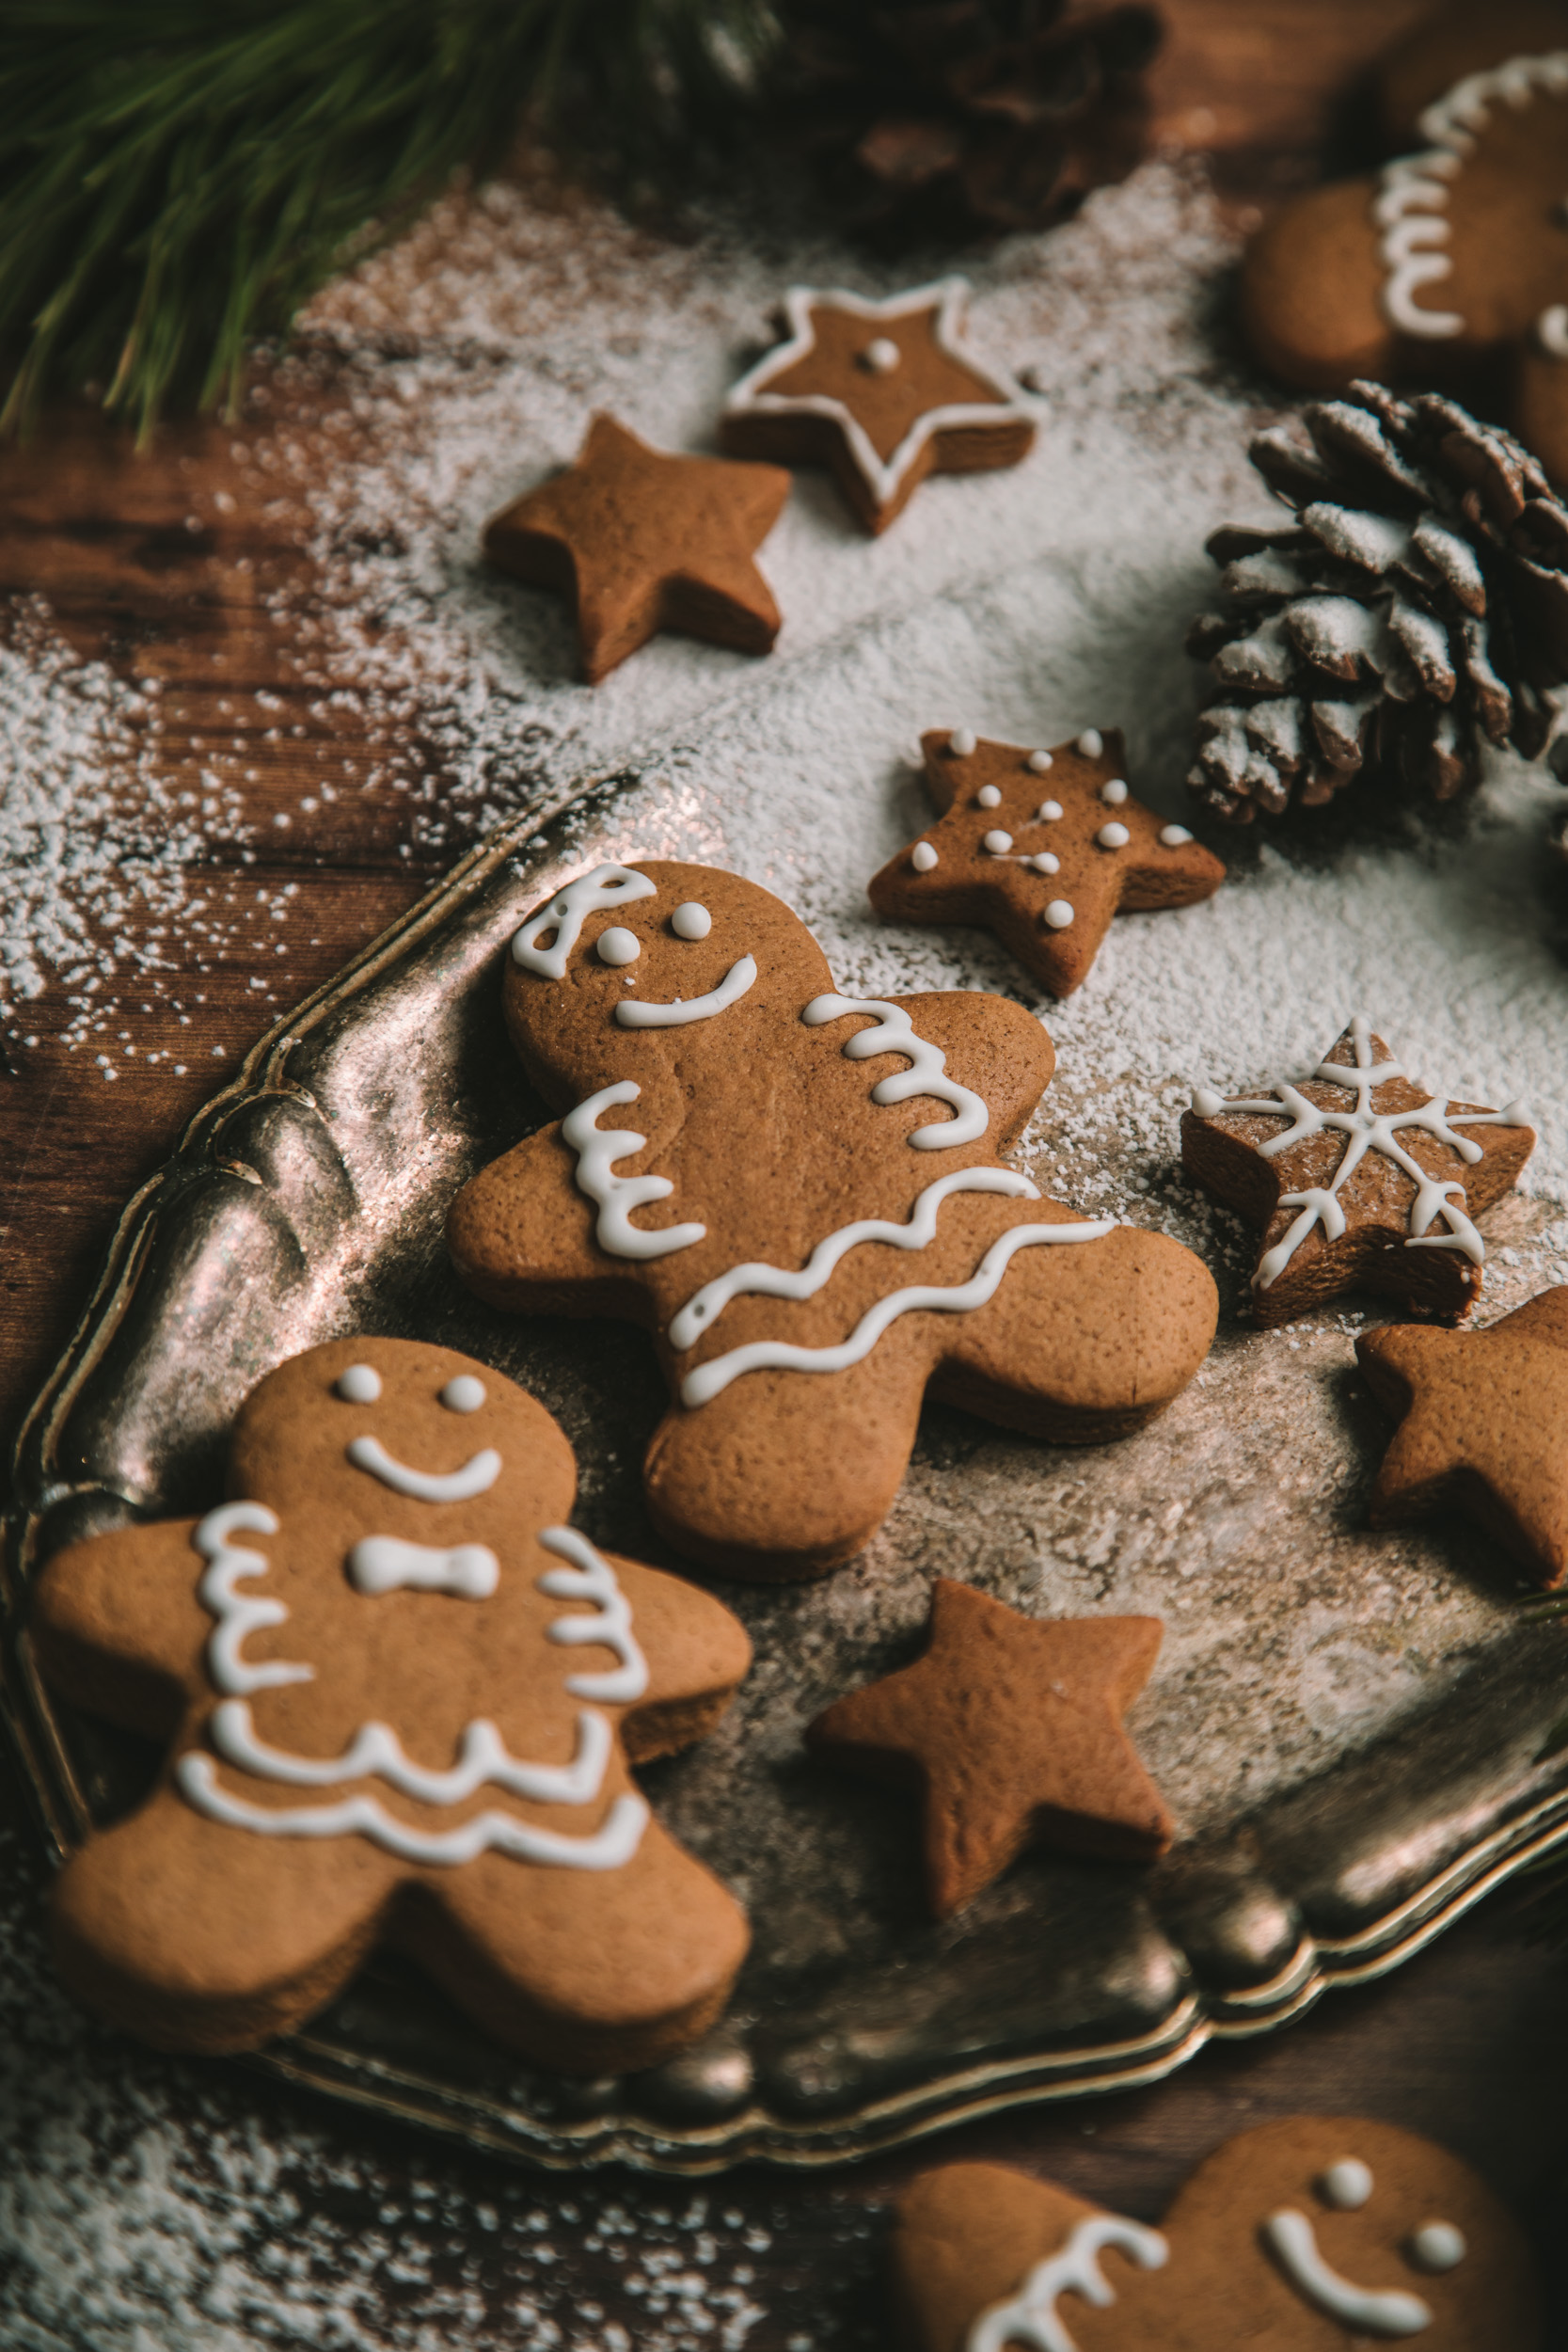 Overhead view of two gingerbread men cookies, decorated with white frosting and surrounded by star shaped gingerbread cookies and icing sugar.